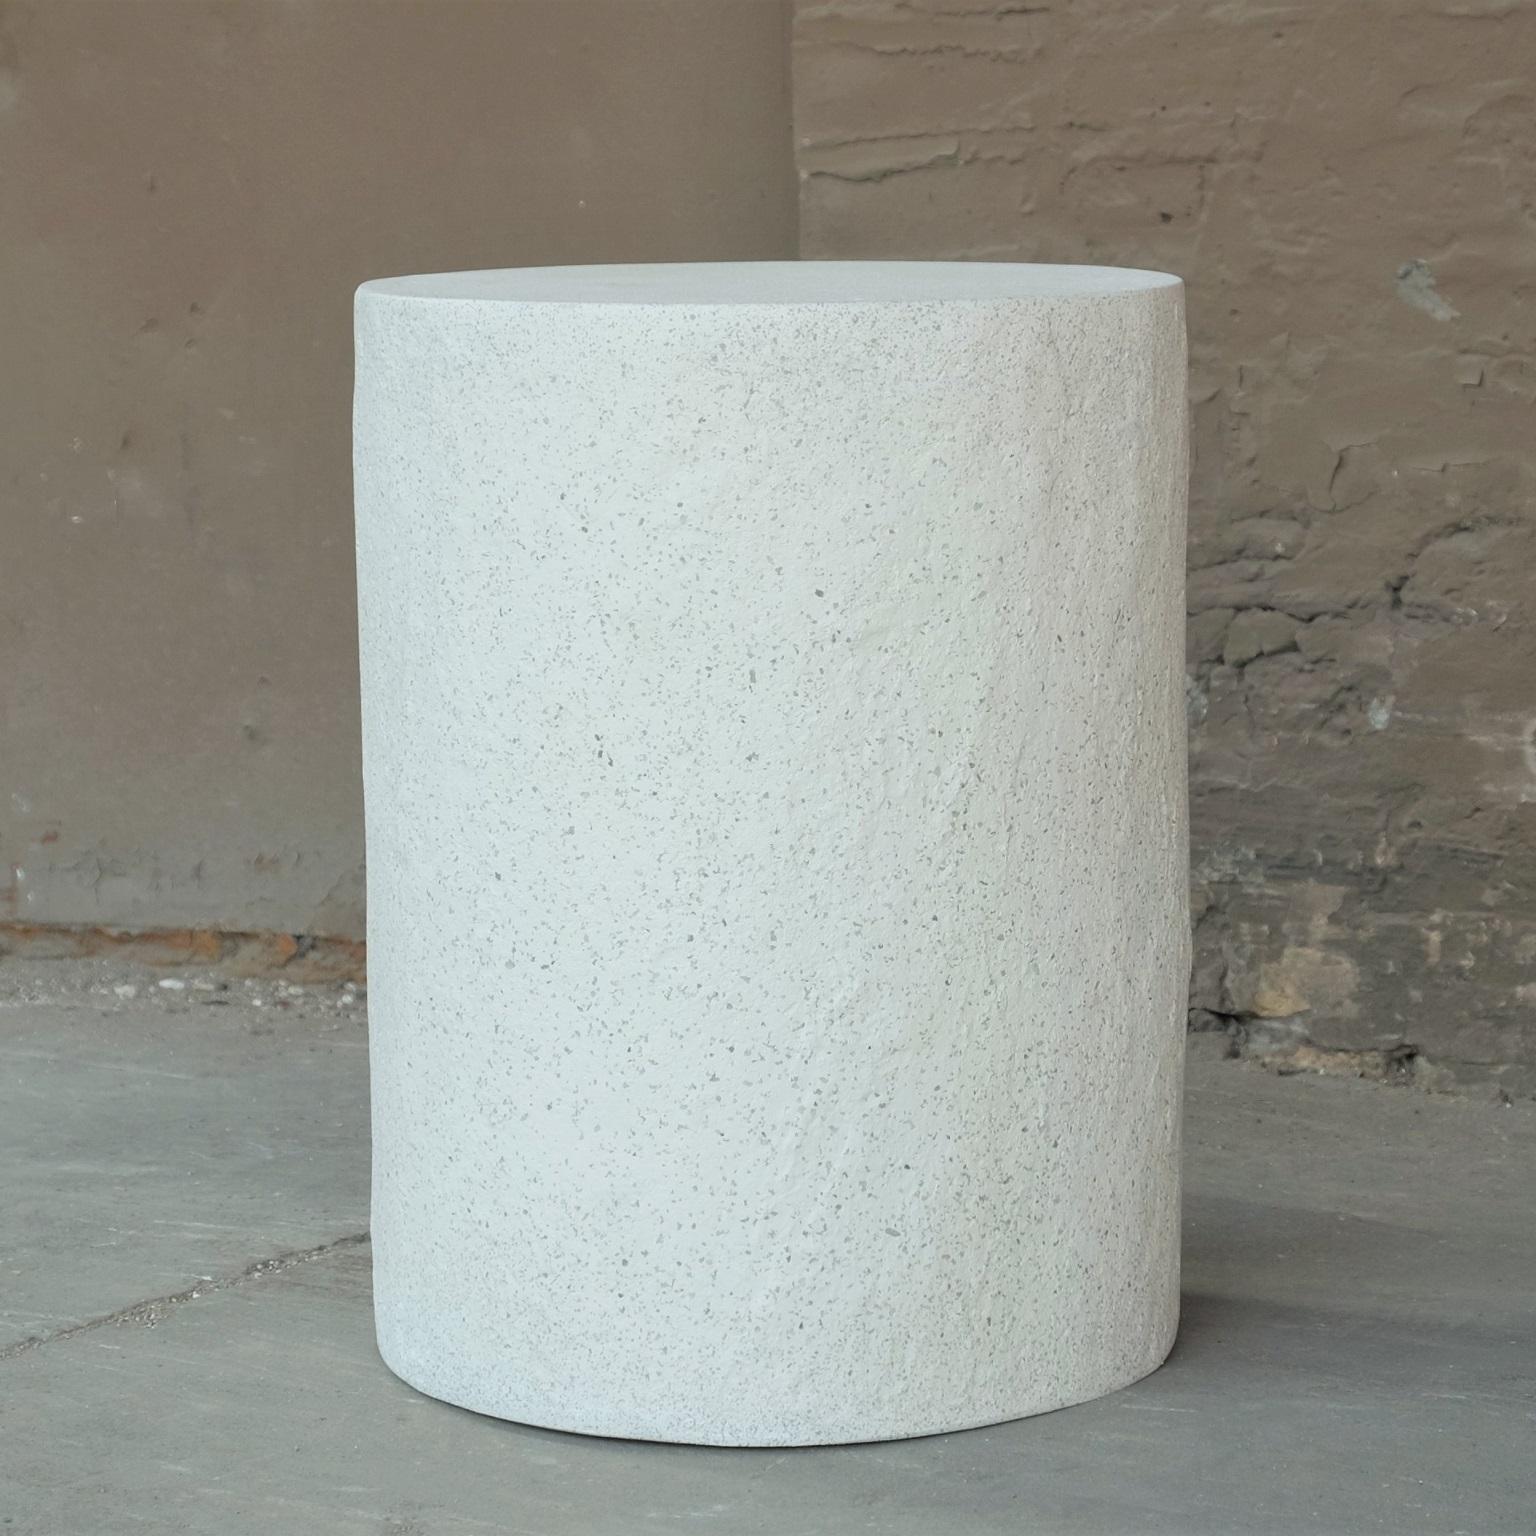 Seating that weathers the storm. A sturdy foundation softened by the rhythms of the coast. 

Dimensions: Diameter 14 in. (35.6 cm), height 18 in. (45.7 cm). Weight 20 lbs. (9 kg)

Finish color options:
white stone (shown)
natural stone
aged